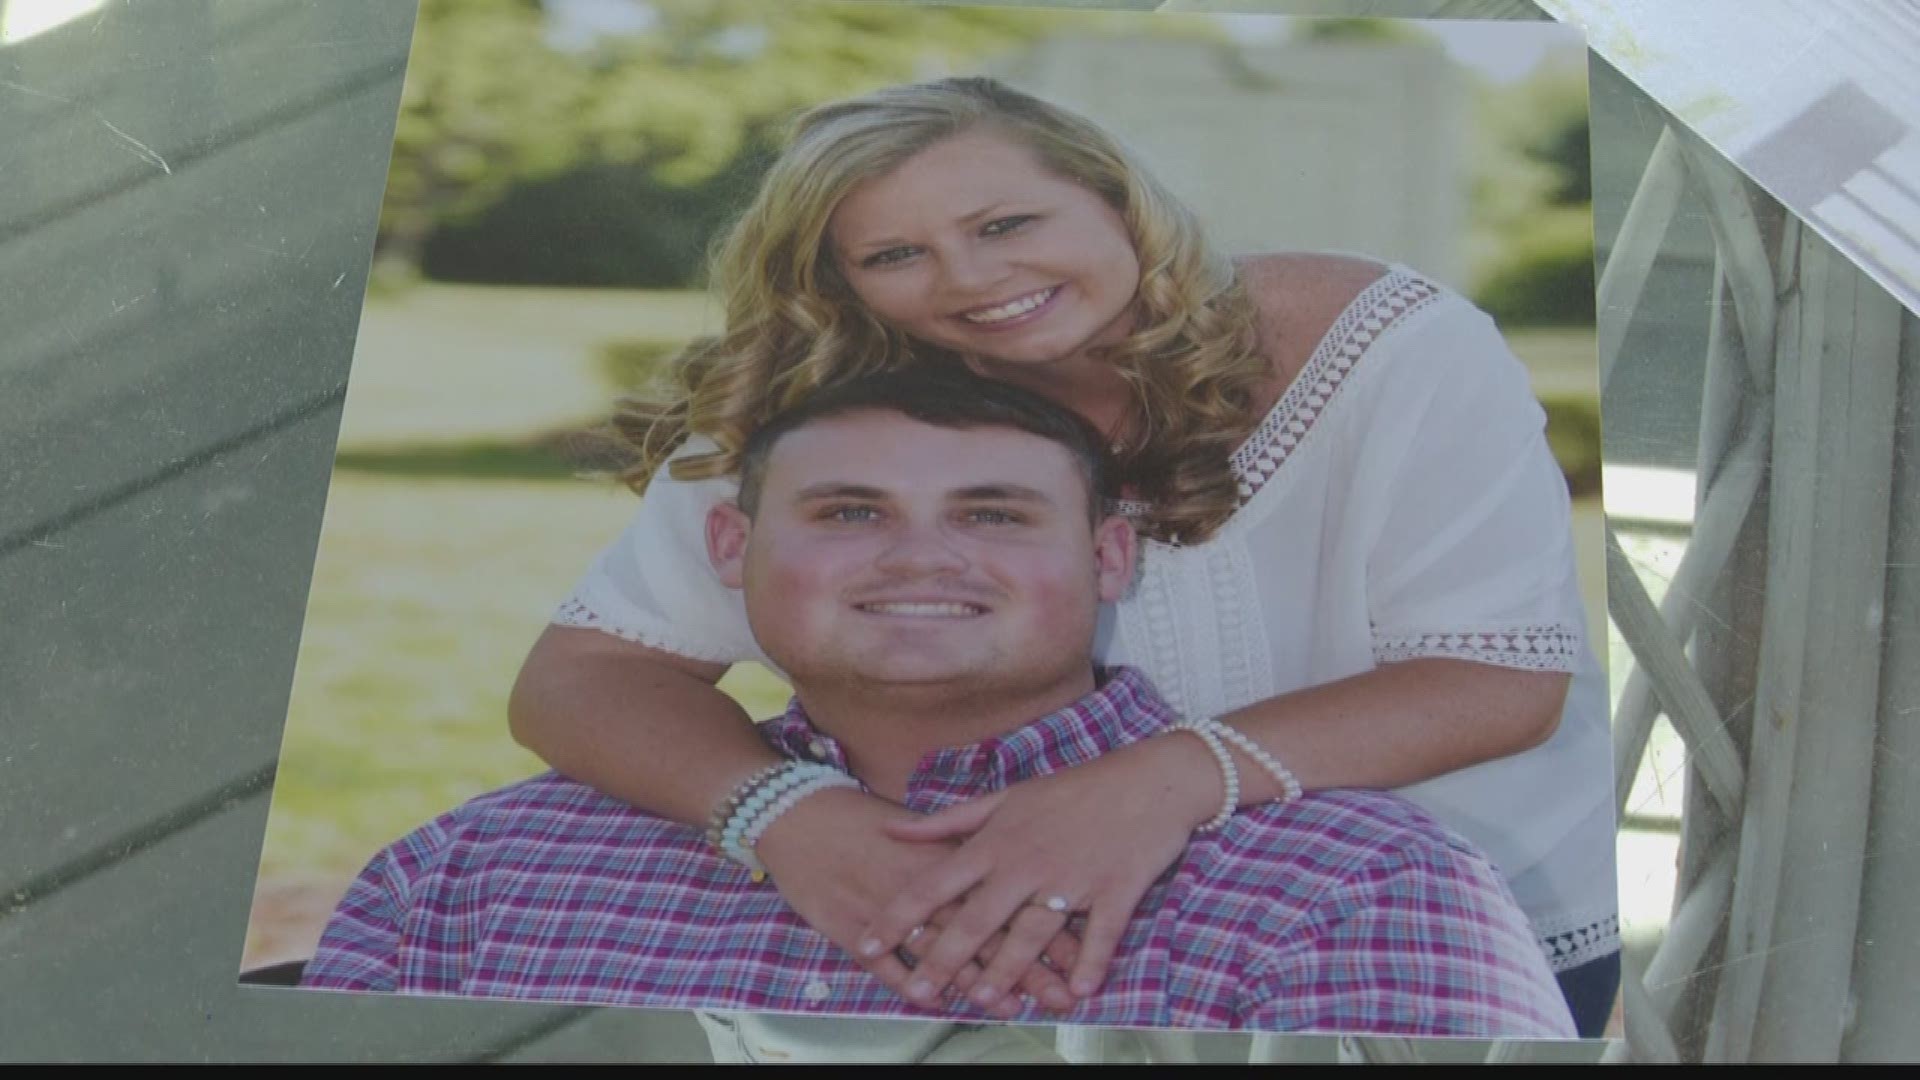 Sarah Smarr and Georgia Southwestern State University Officer Jody Smith planned to get married at the end of May.